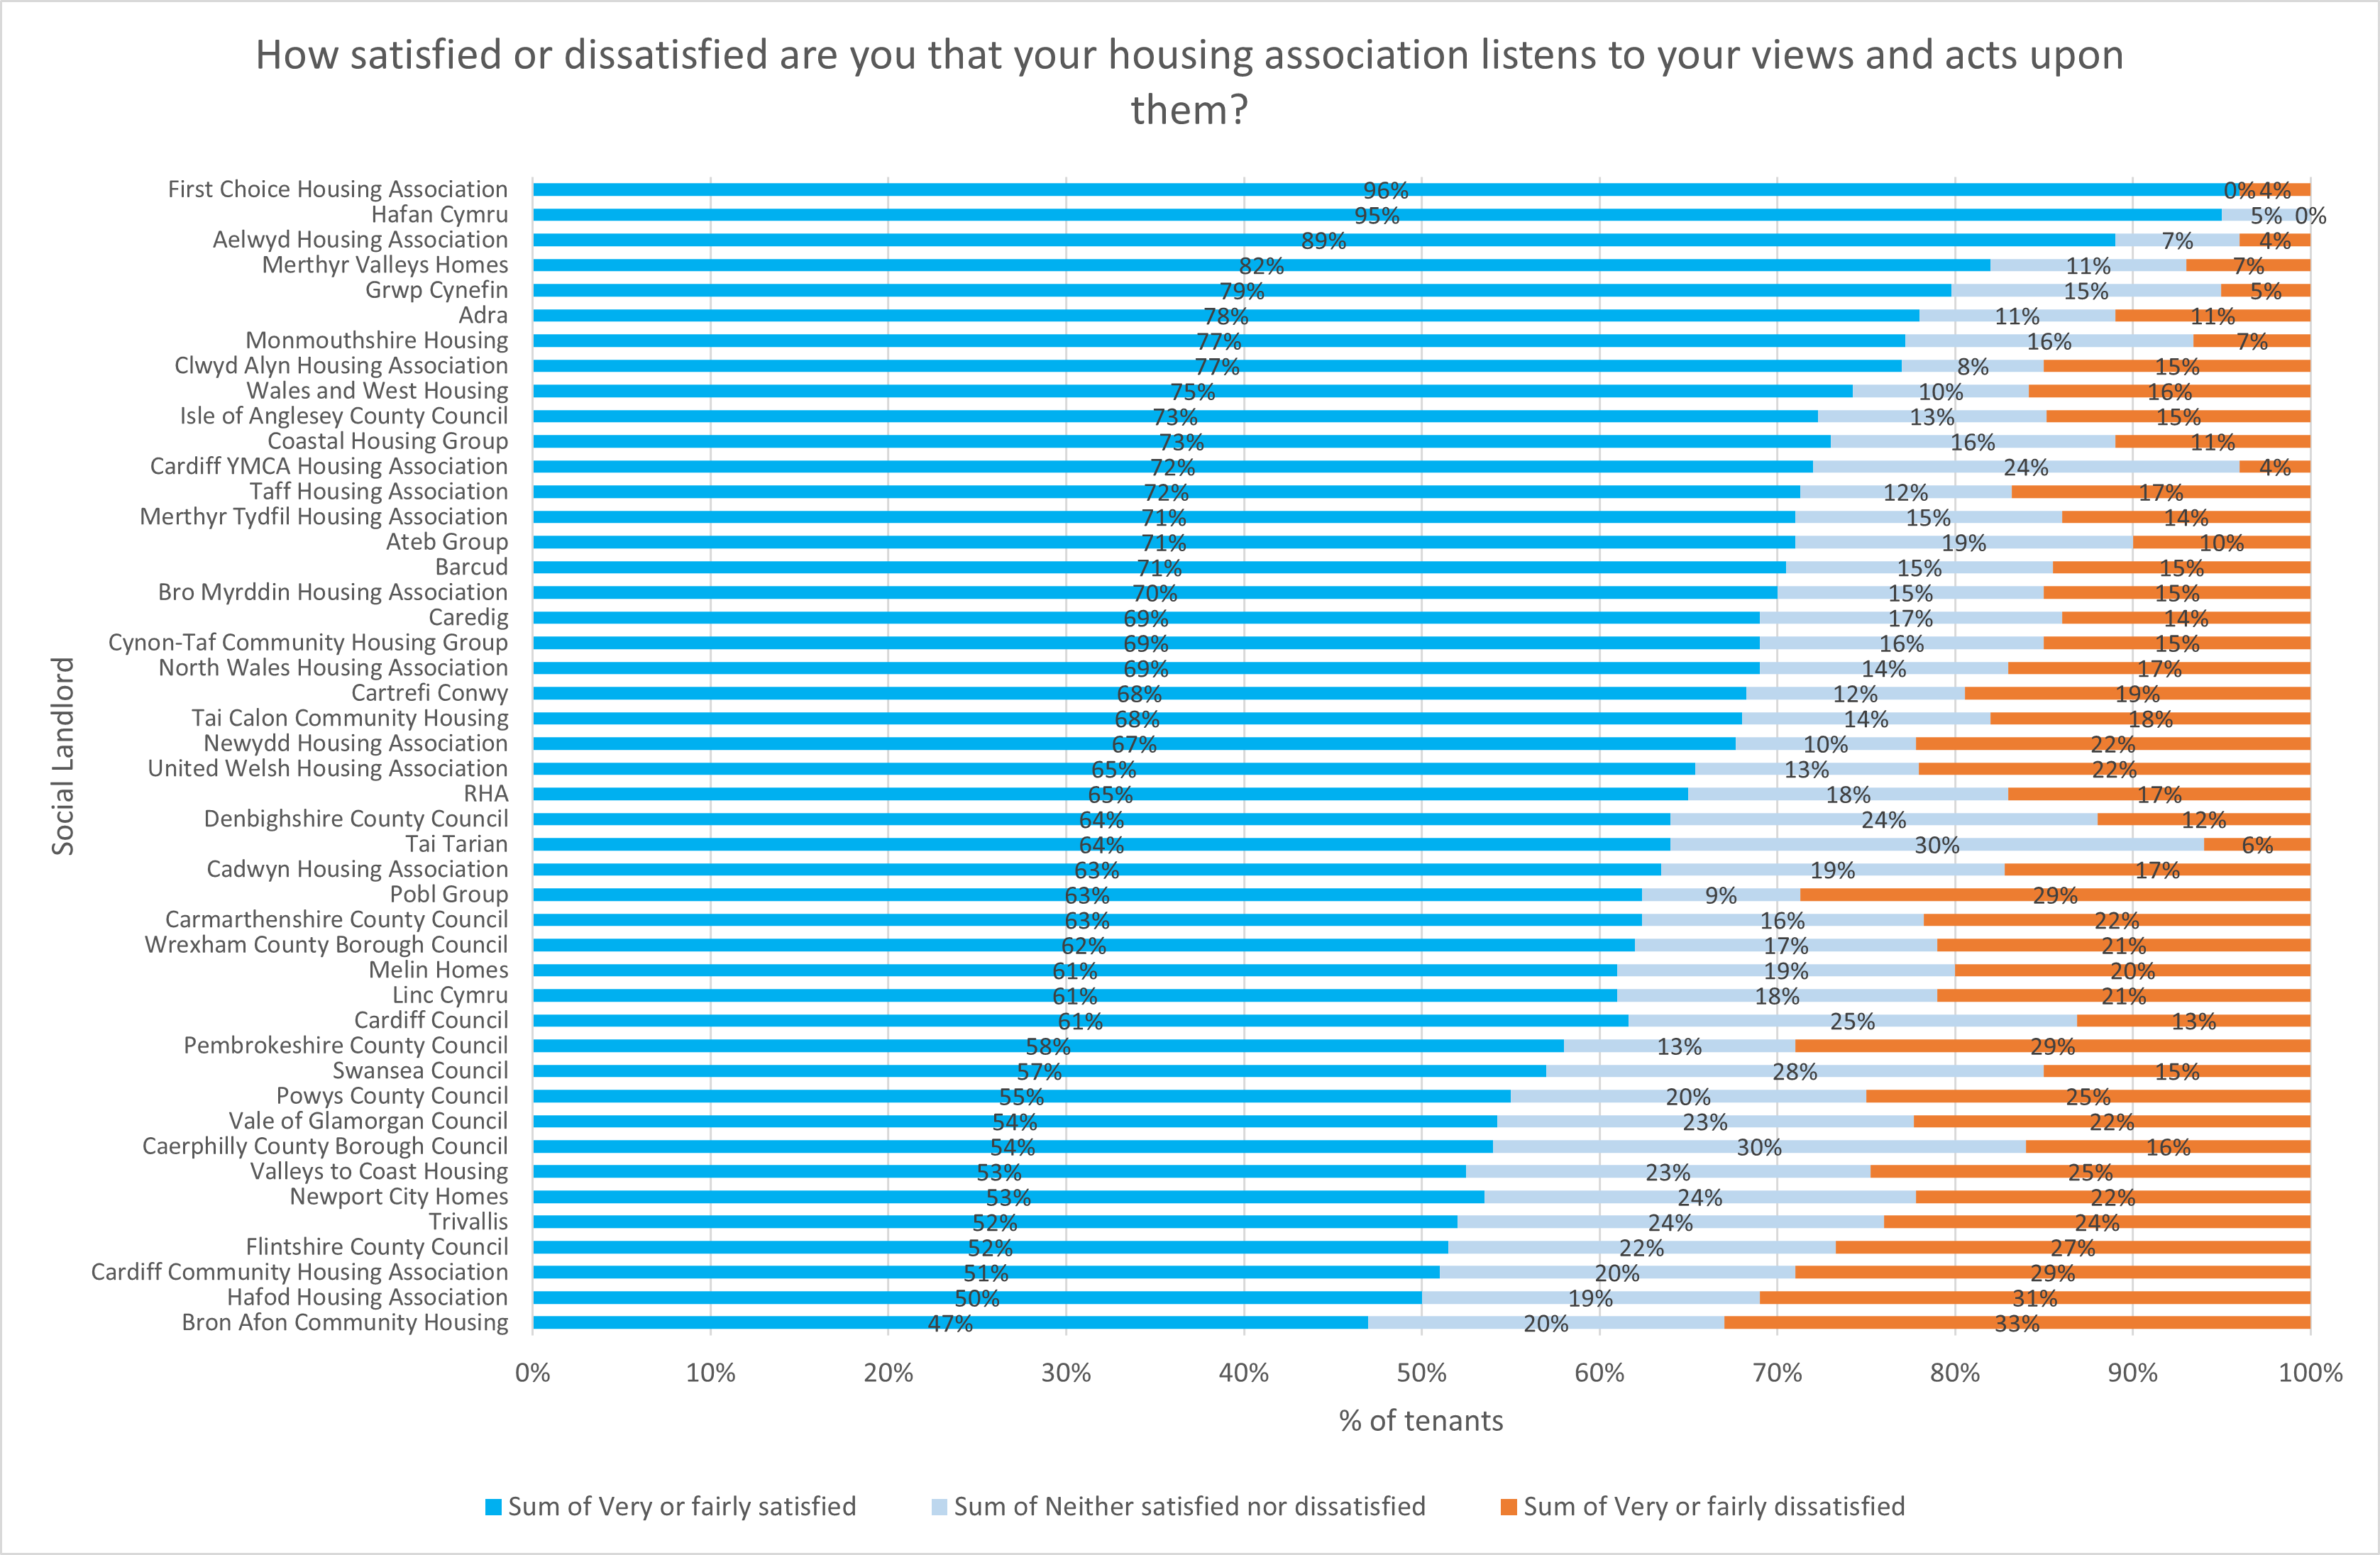 How satisfied or dissatisfied are you that your housing association listens to your views and acts upon them?